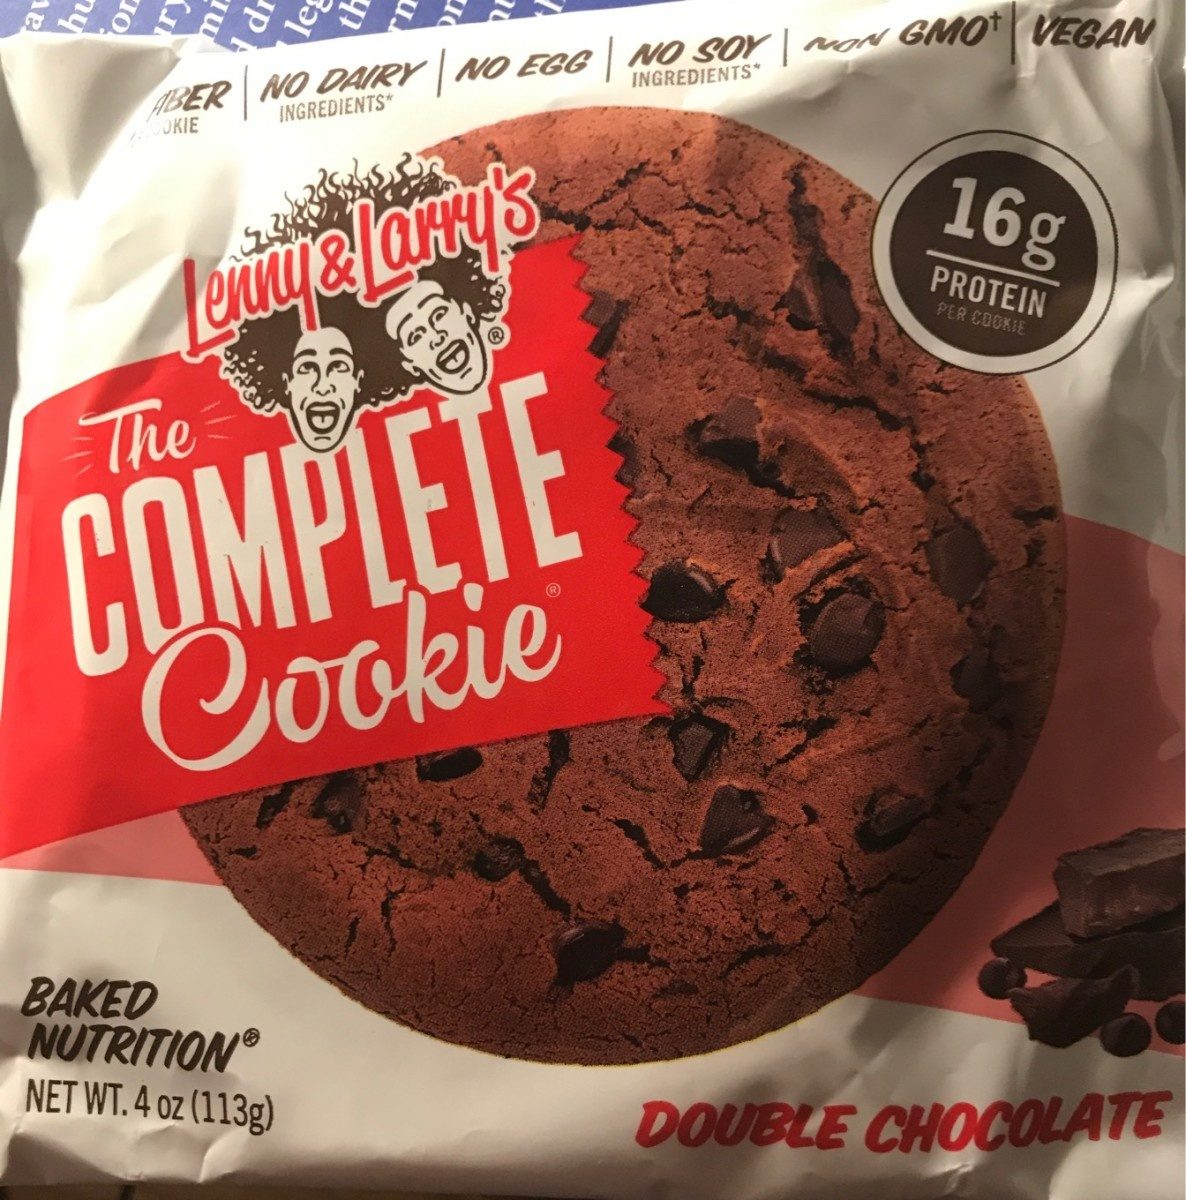 Double chocolate baked nutrition cookie, double chocolate - Product